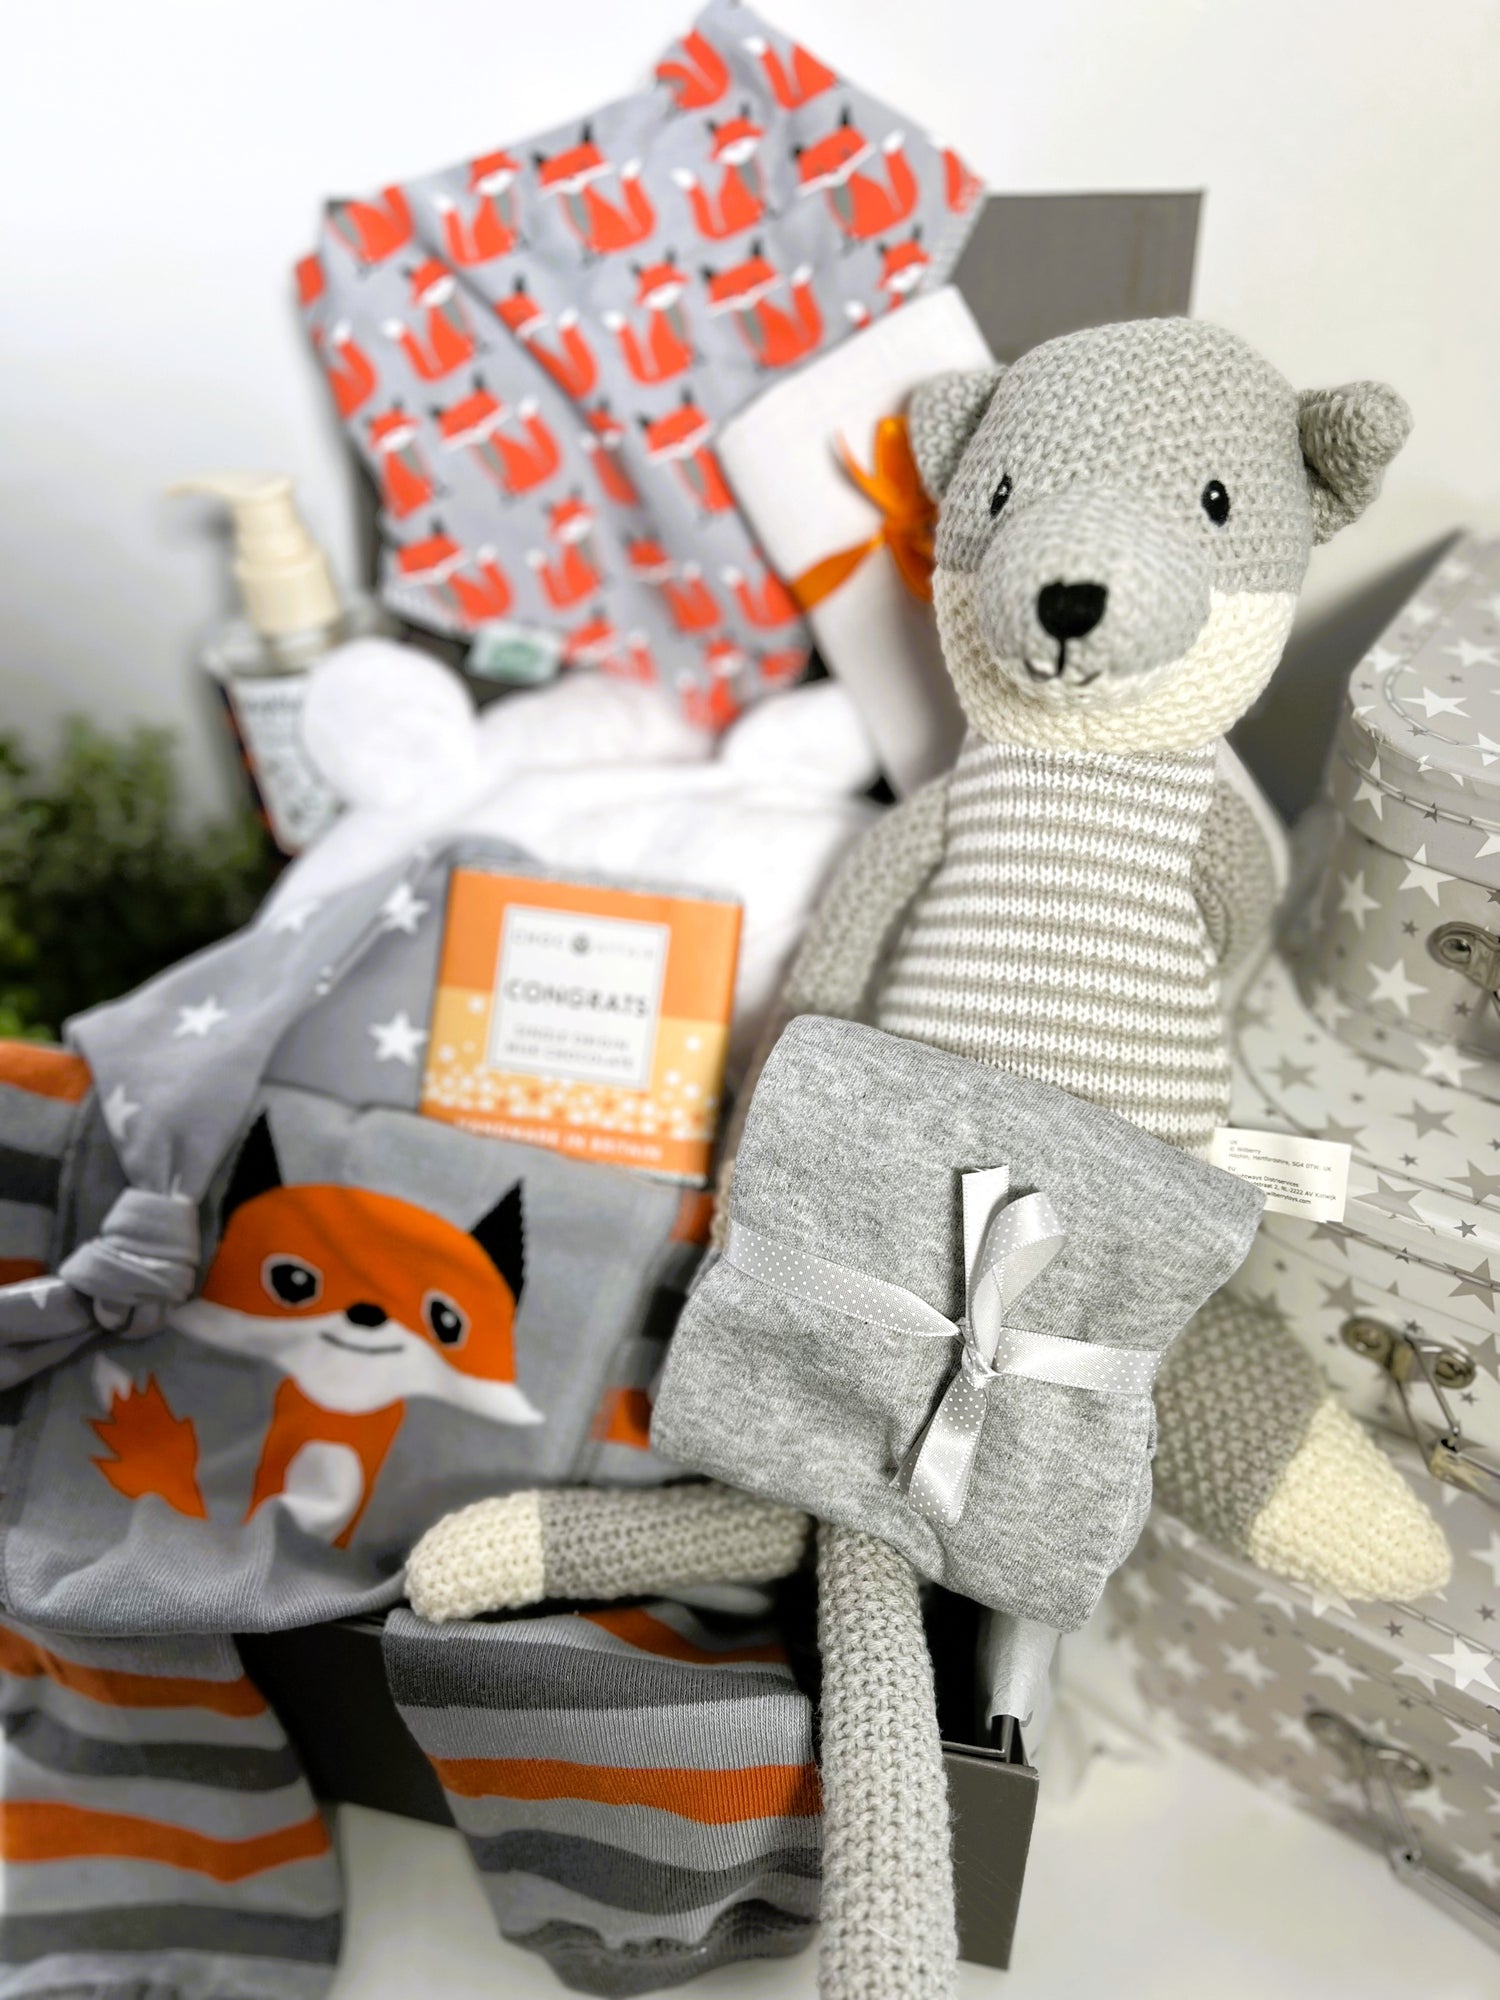 A fox themed new baby hamper containing a wilbeery fox knitted toy, a pair of Ziggle fox baby leggings with a Ziggle fox bib, a white hooded baby dressing gown, a bottle of baby wash, a Ziggle grey and white stars baby knot hat, a muslin square a grey baby vest and a bar of chocolate.